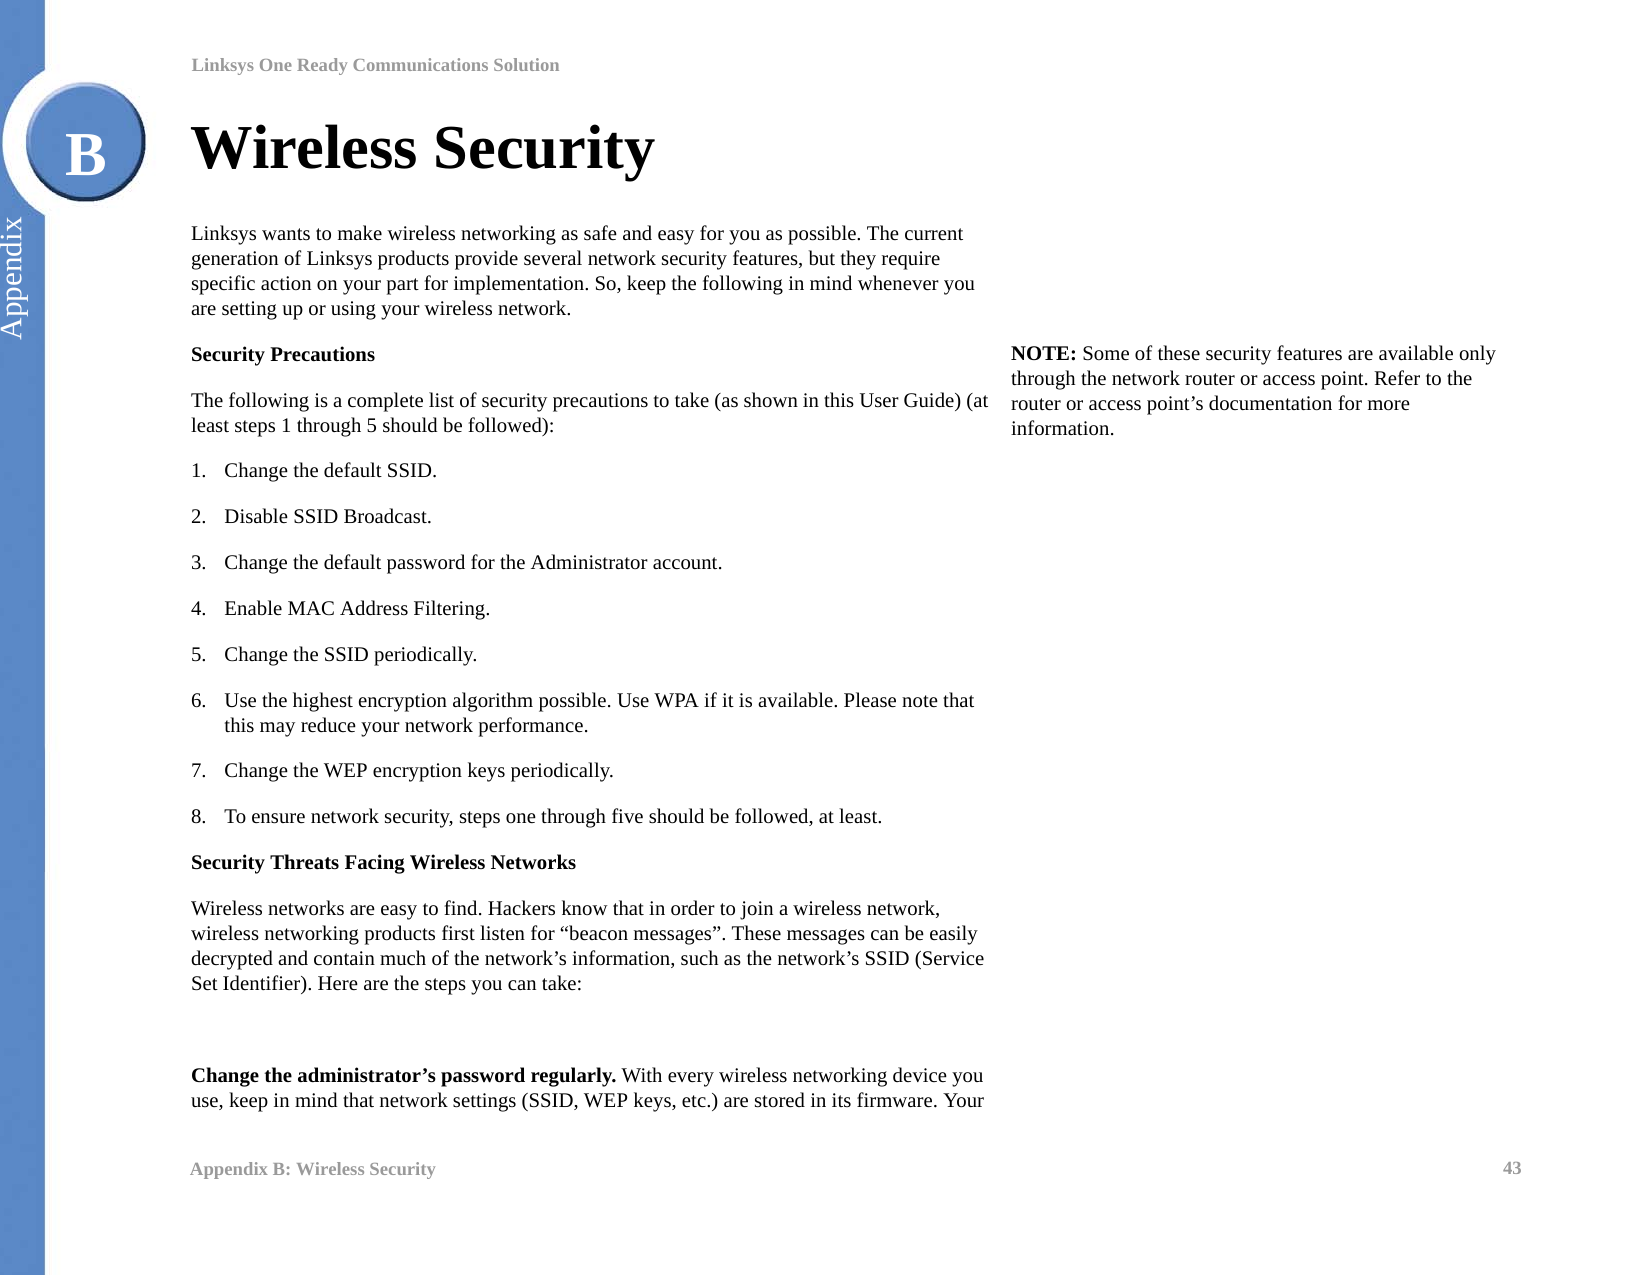 43Appendix B: Wireless SecurityLinksys One Ready Communications SolutionAppendixBWireless SecurityLinksys wants to make wireless networking as safe and easy for you as possible. The current generation of Linksys products provide several network security features, but they require specific action on your part for implementation. So, keep the following in mind whenever you are setting up or using your wireless network.Security PrecautionsThe following is a complete list of security precautions to take (as shown in this User Guide) (at least steps 1 through 5 should be followed):1. Change the default SSID. 2. Disable SSID Broadcast. 3. Change the default password for the Administrator account. 4. Enable MAC Address Filtering. 5. Change the SSID periodically. 6. Use the highest encryption algorithm possible. Use WPA if it is available. Please note that this may reduce your network performance. 7. Change the WEP encryption keys periodically. 8. To ensure network security, steps one through five should be followed, at least.Security Threats Facing Wireless Networks Wireless networks are easy to find. Hackers know that in order to join a wireless network, wireless networking products first listen for “beacon messages”. These messages can be easily decrypted and contain much of the network’s information, such as the network’s SSID (Service Set Identifier). Here are the steps you can take:Change the administrator’s password regularly. With every wireless networking device you use, keep in mind that network settings (SSID, WEP keys, etc.) are stored in its firmware. Your NOTE: Some of these security features are available only through the network router or access point. Refer to the router or access point’s documentation for more information.